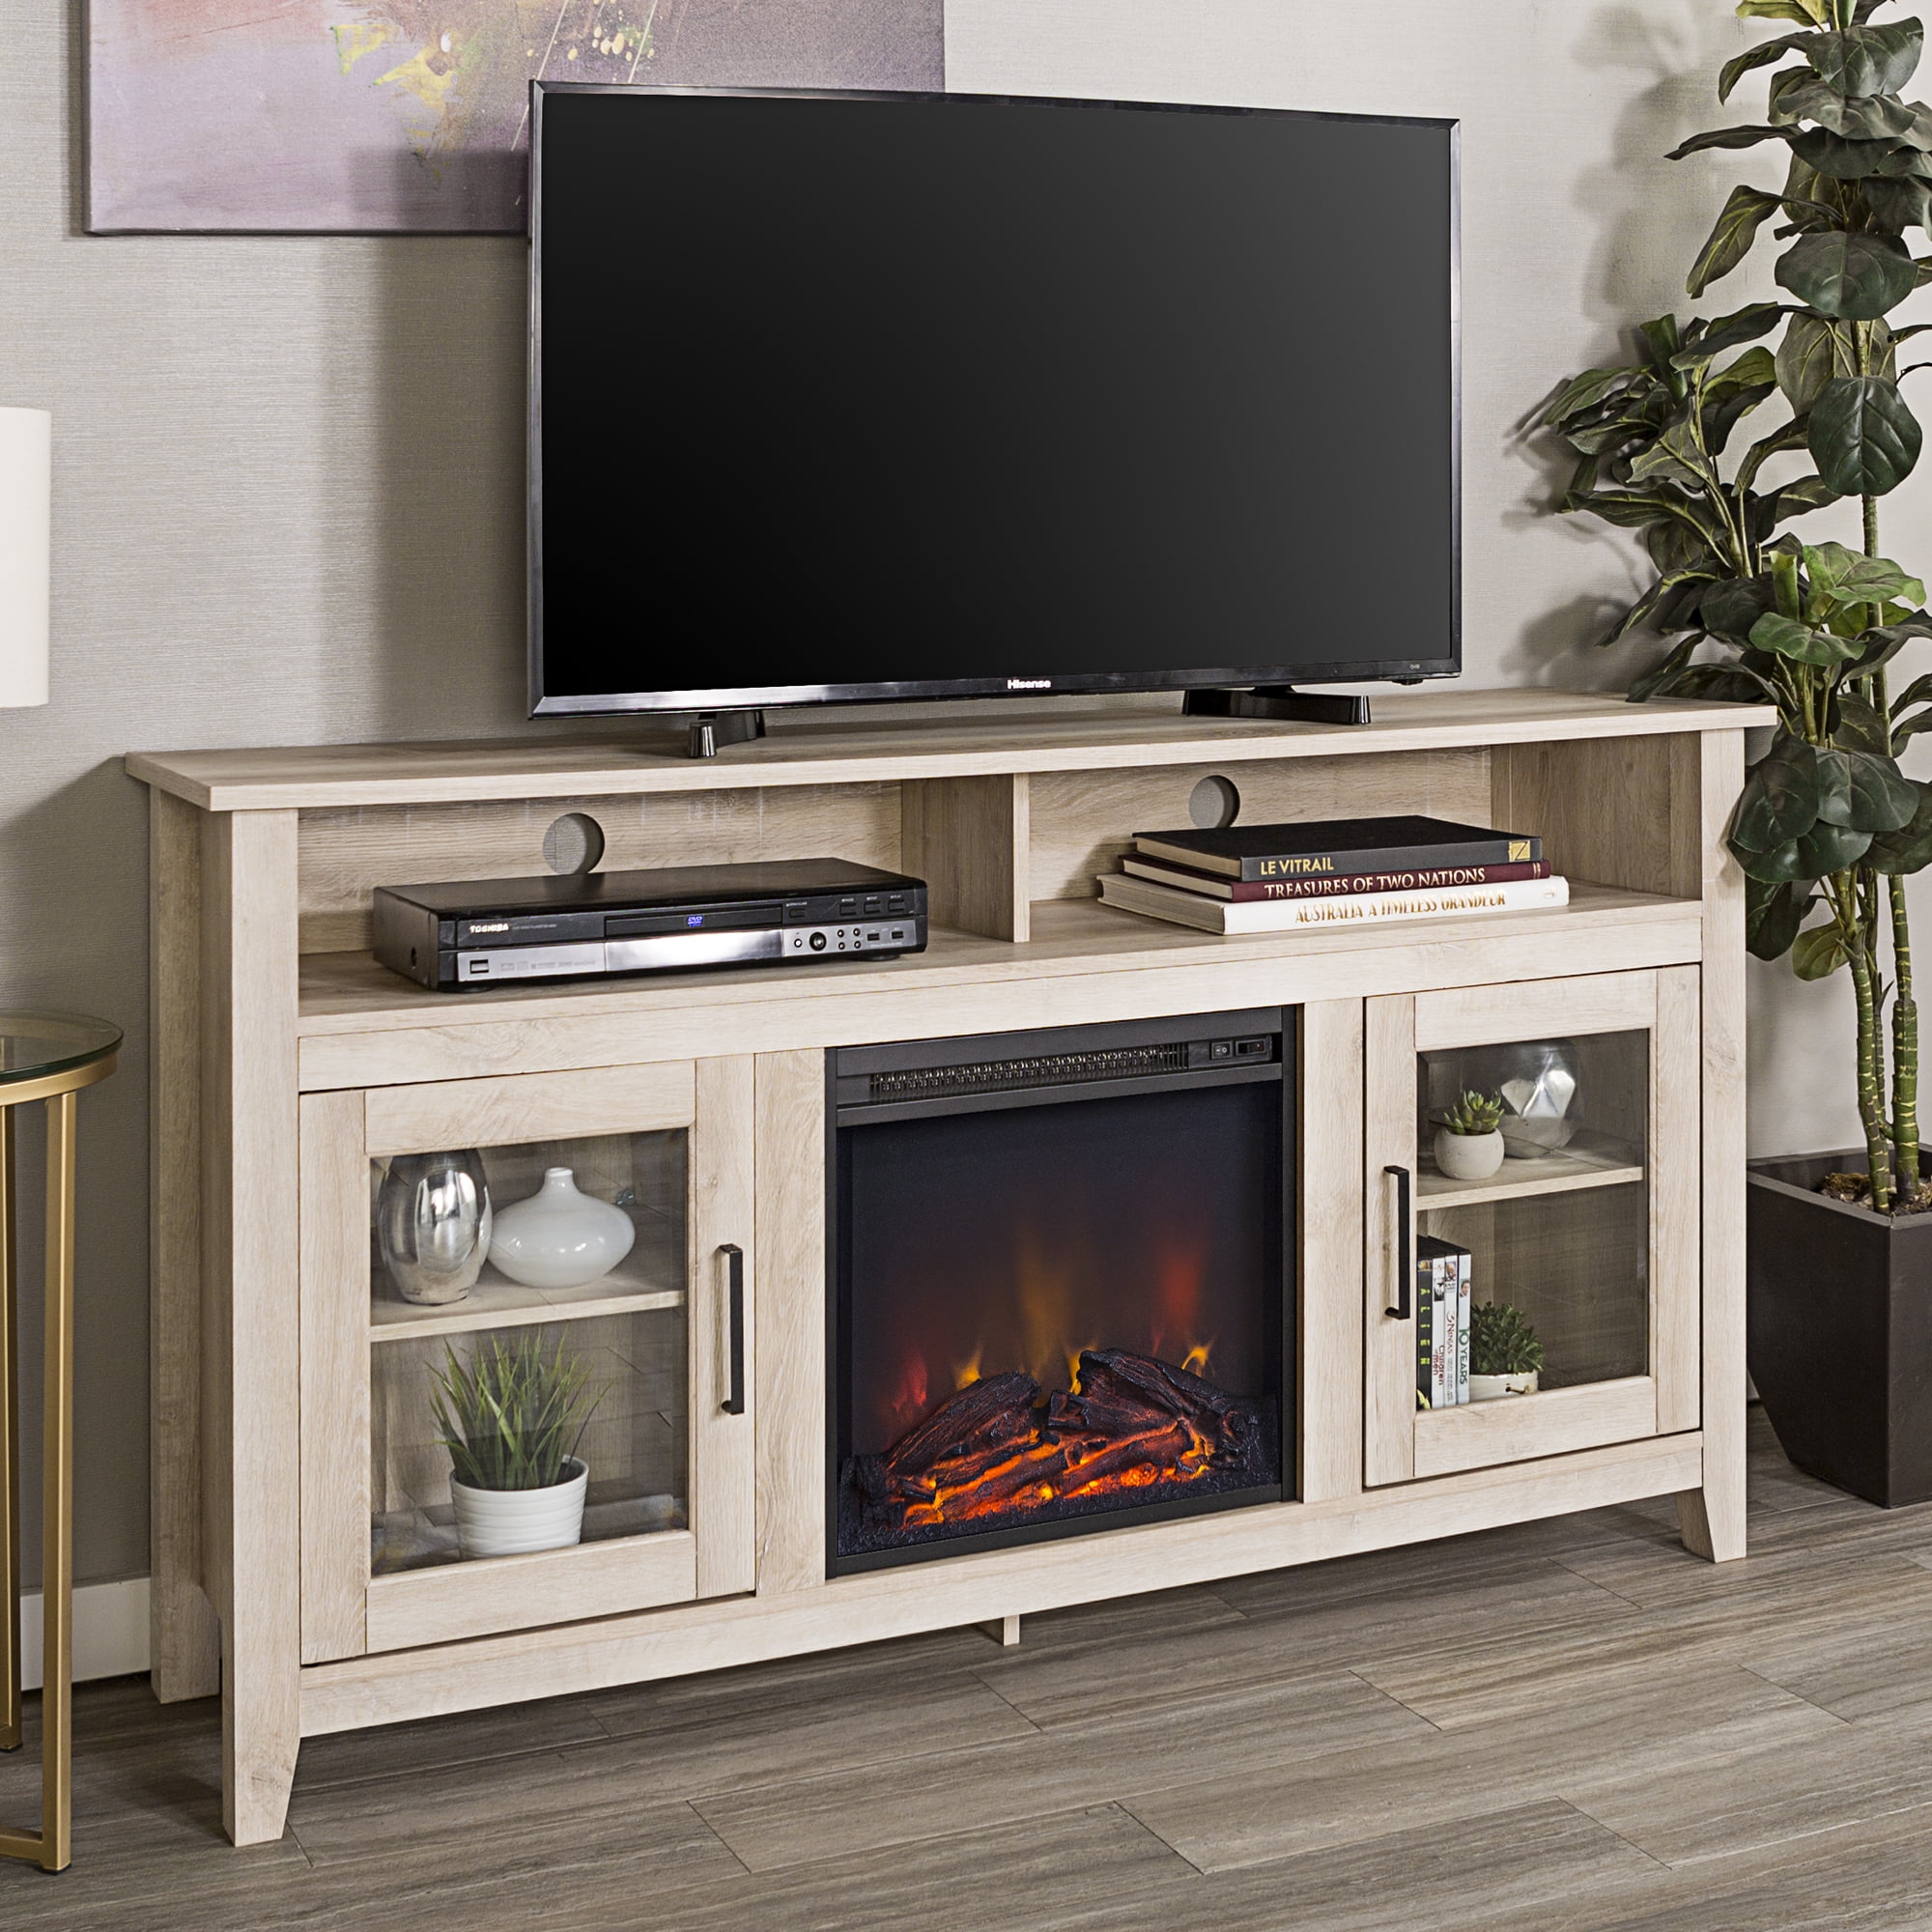 Walker Edison Tall Fireplace TV Stand for TVs up to 64 ...